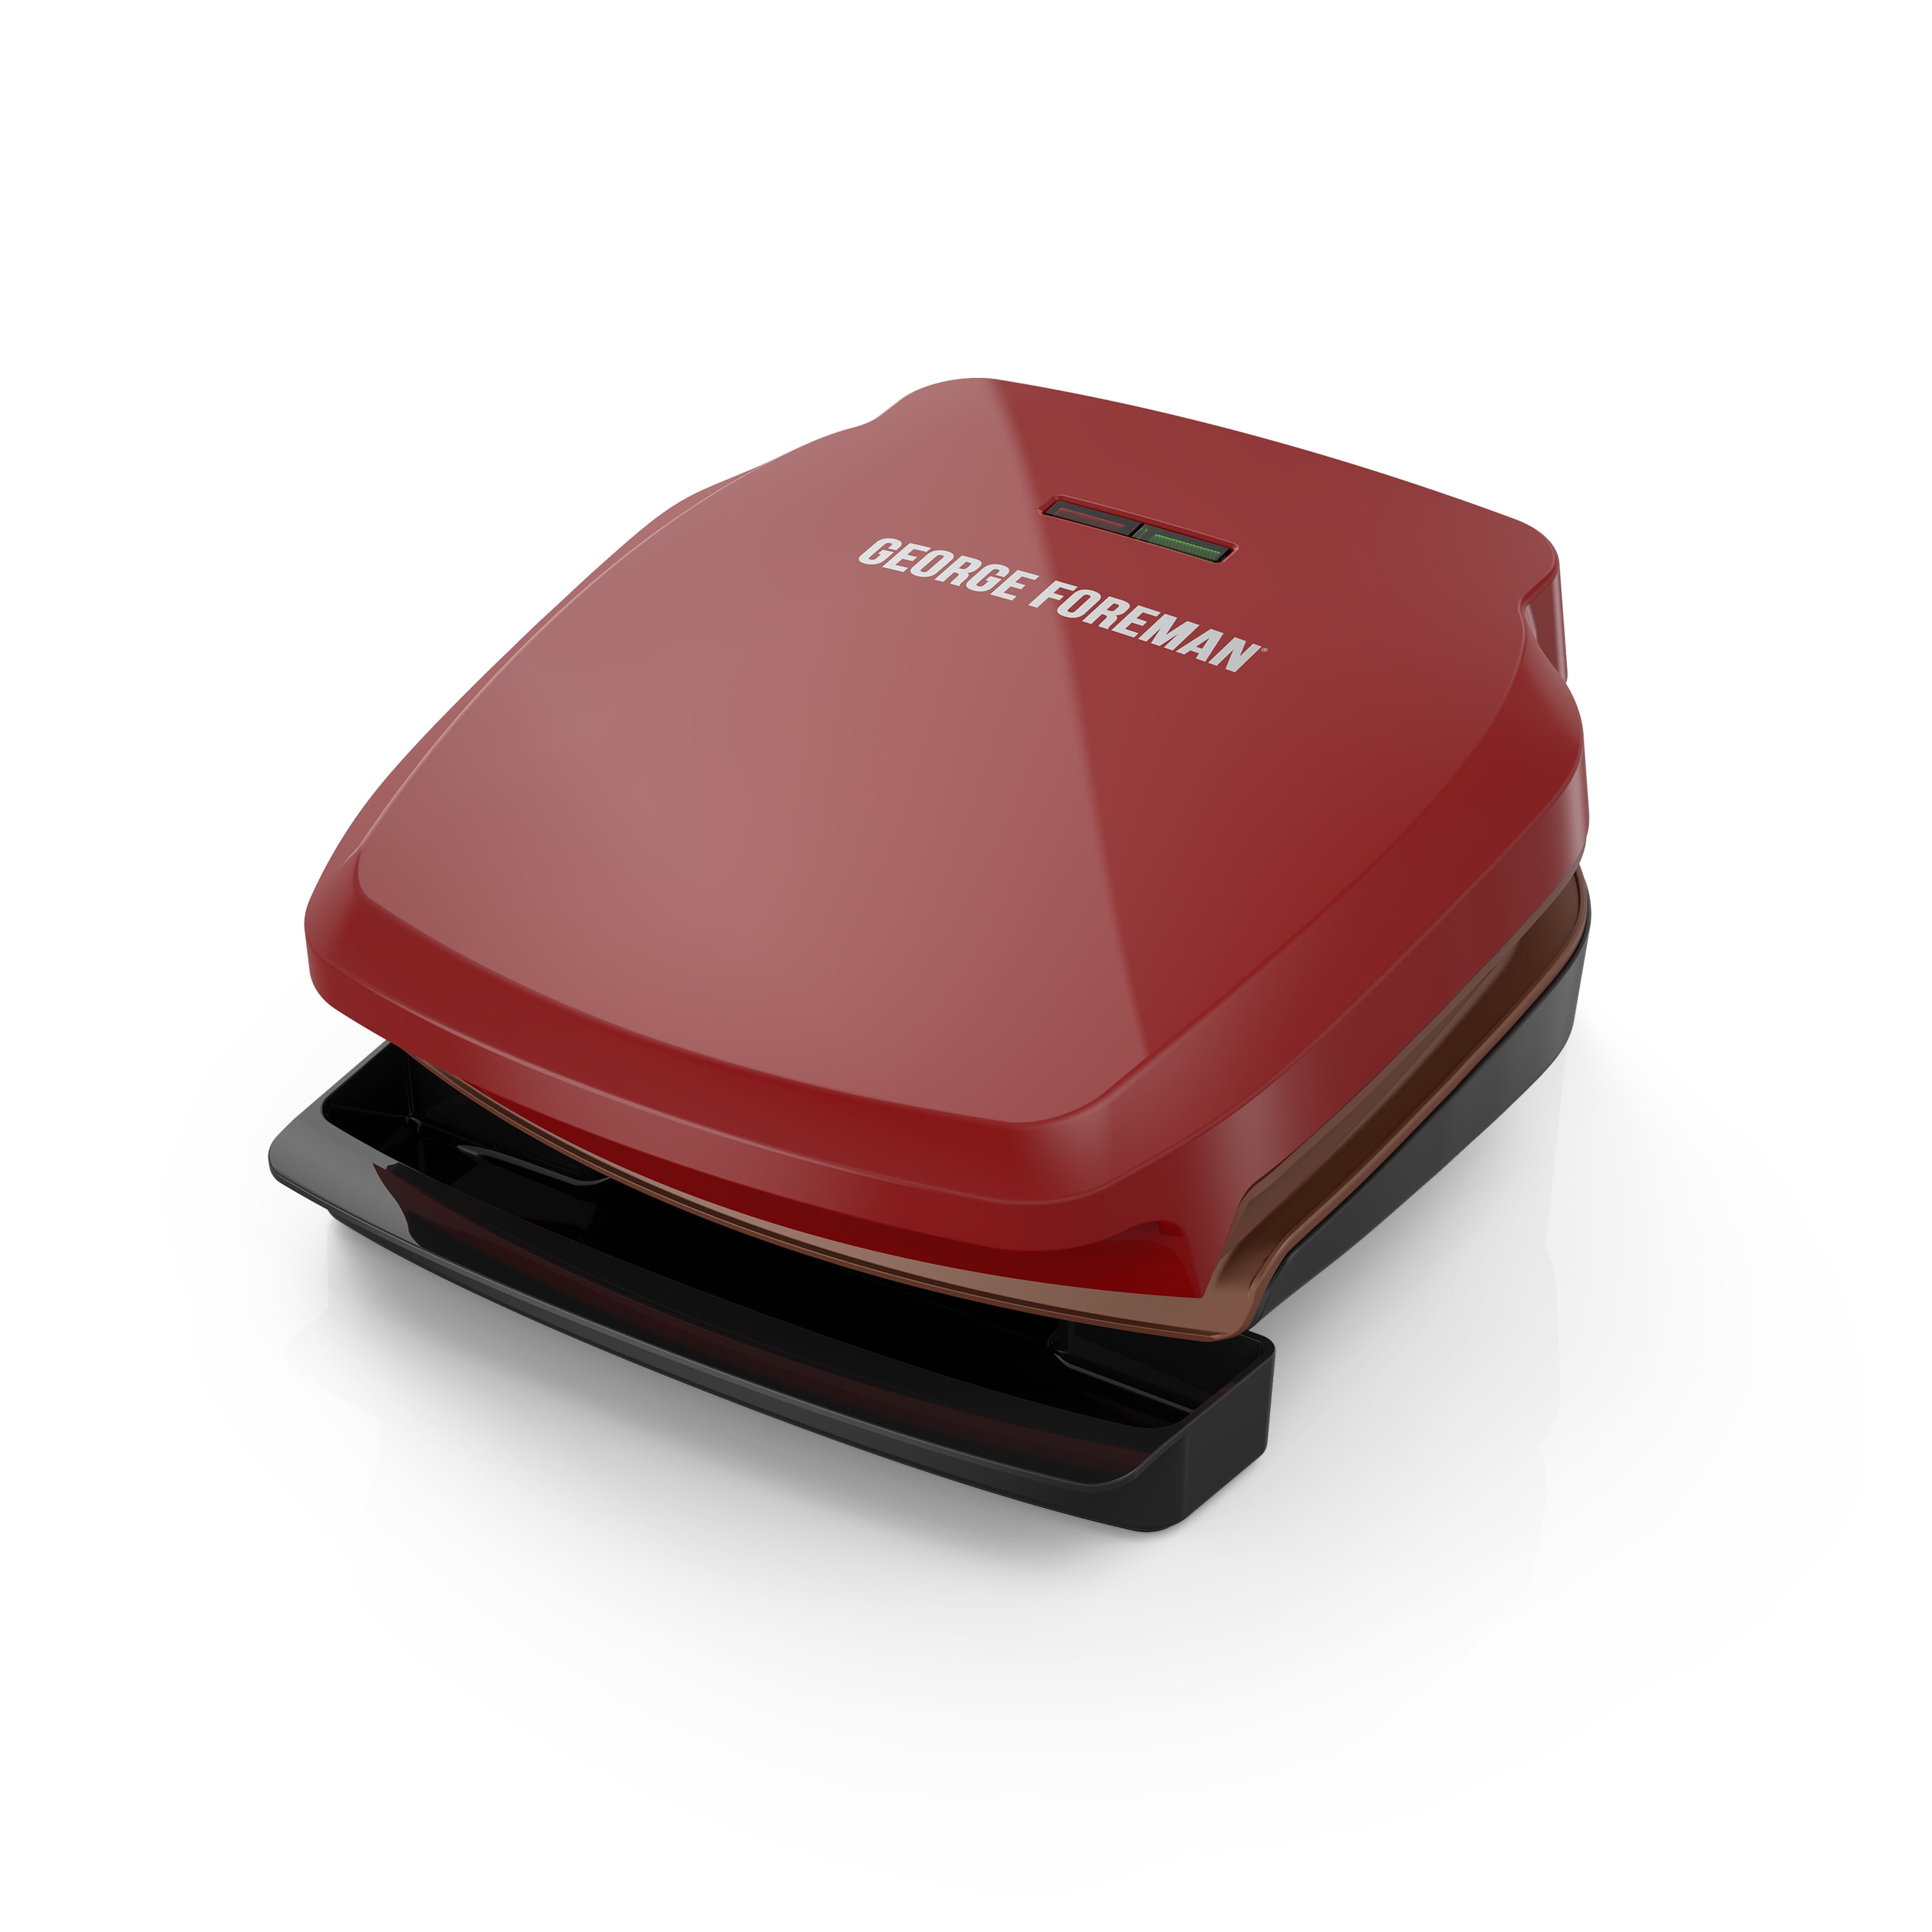 GEORGE FOREMAN 2 SERVING GRILL & PANINI Copper Infused coating 